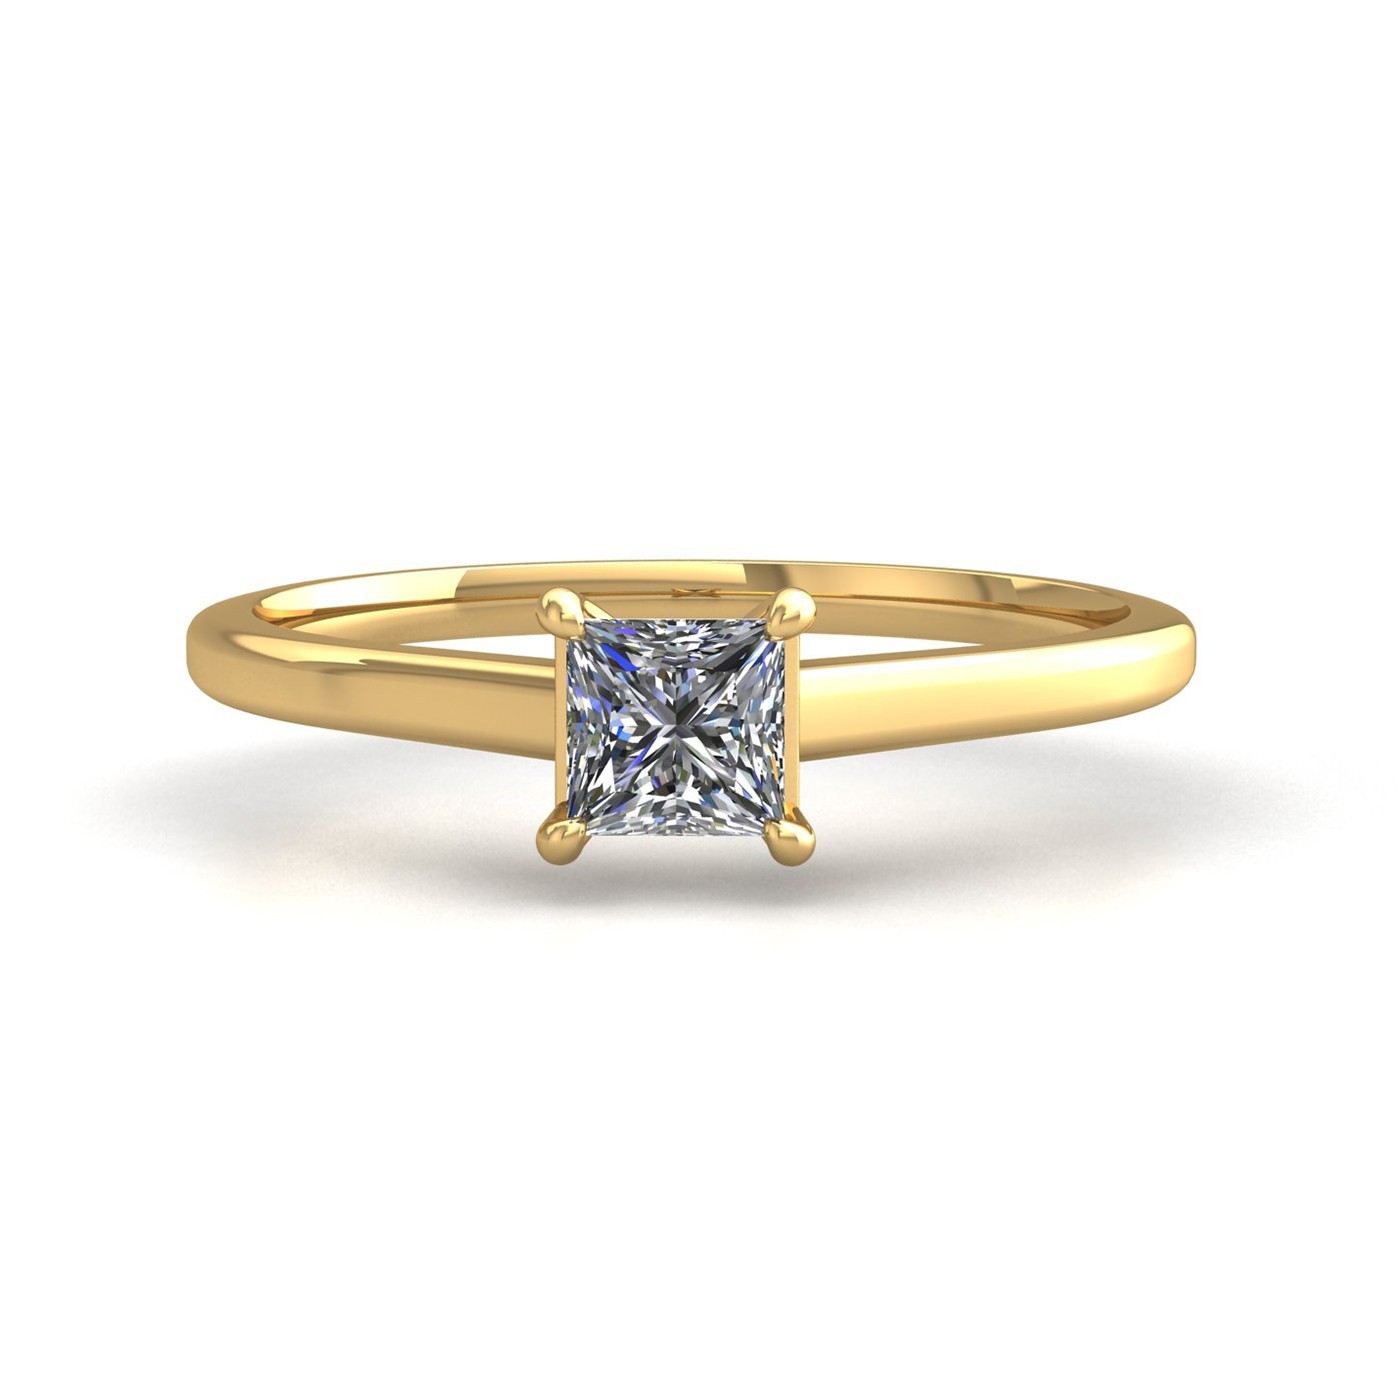 18k yellow gold  0,80 ct 4 prongs solitaire princess cut diamond engagement ring with whisper thin band Photos & images